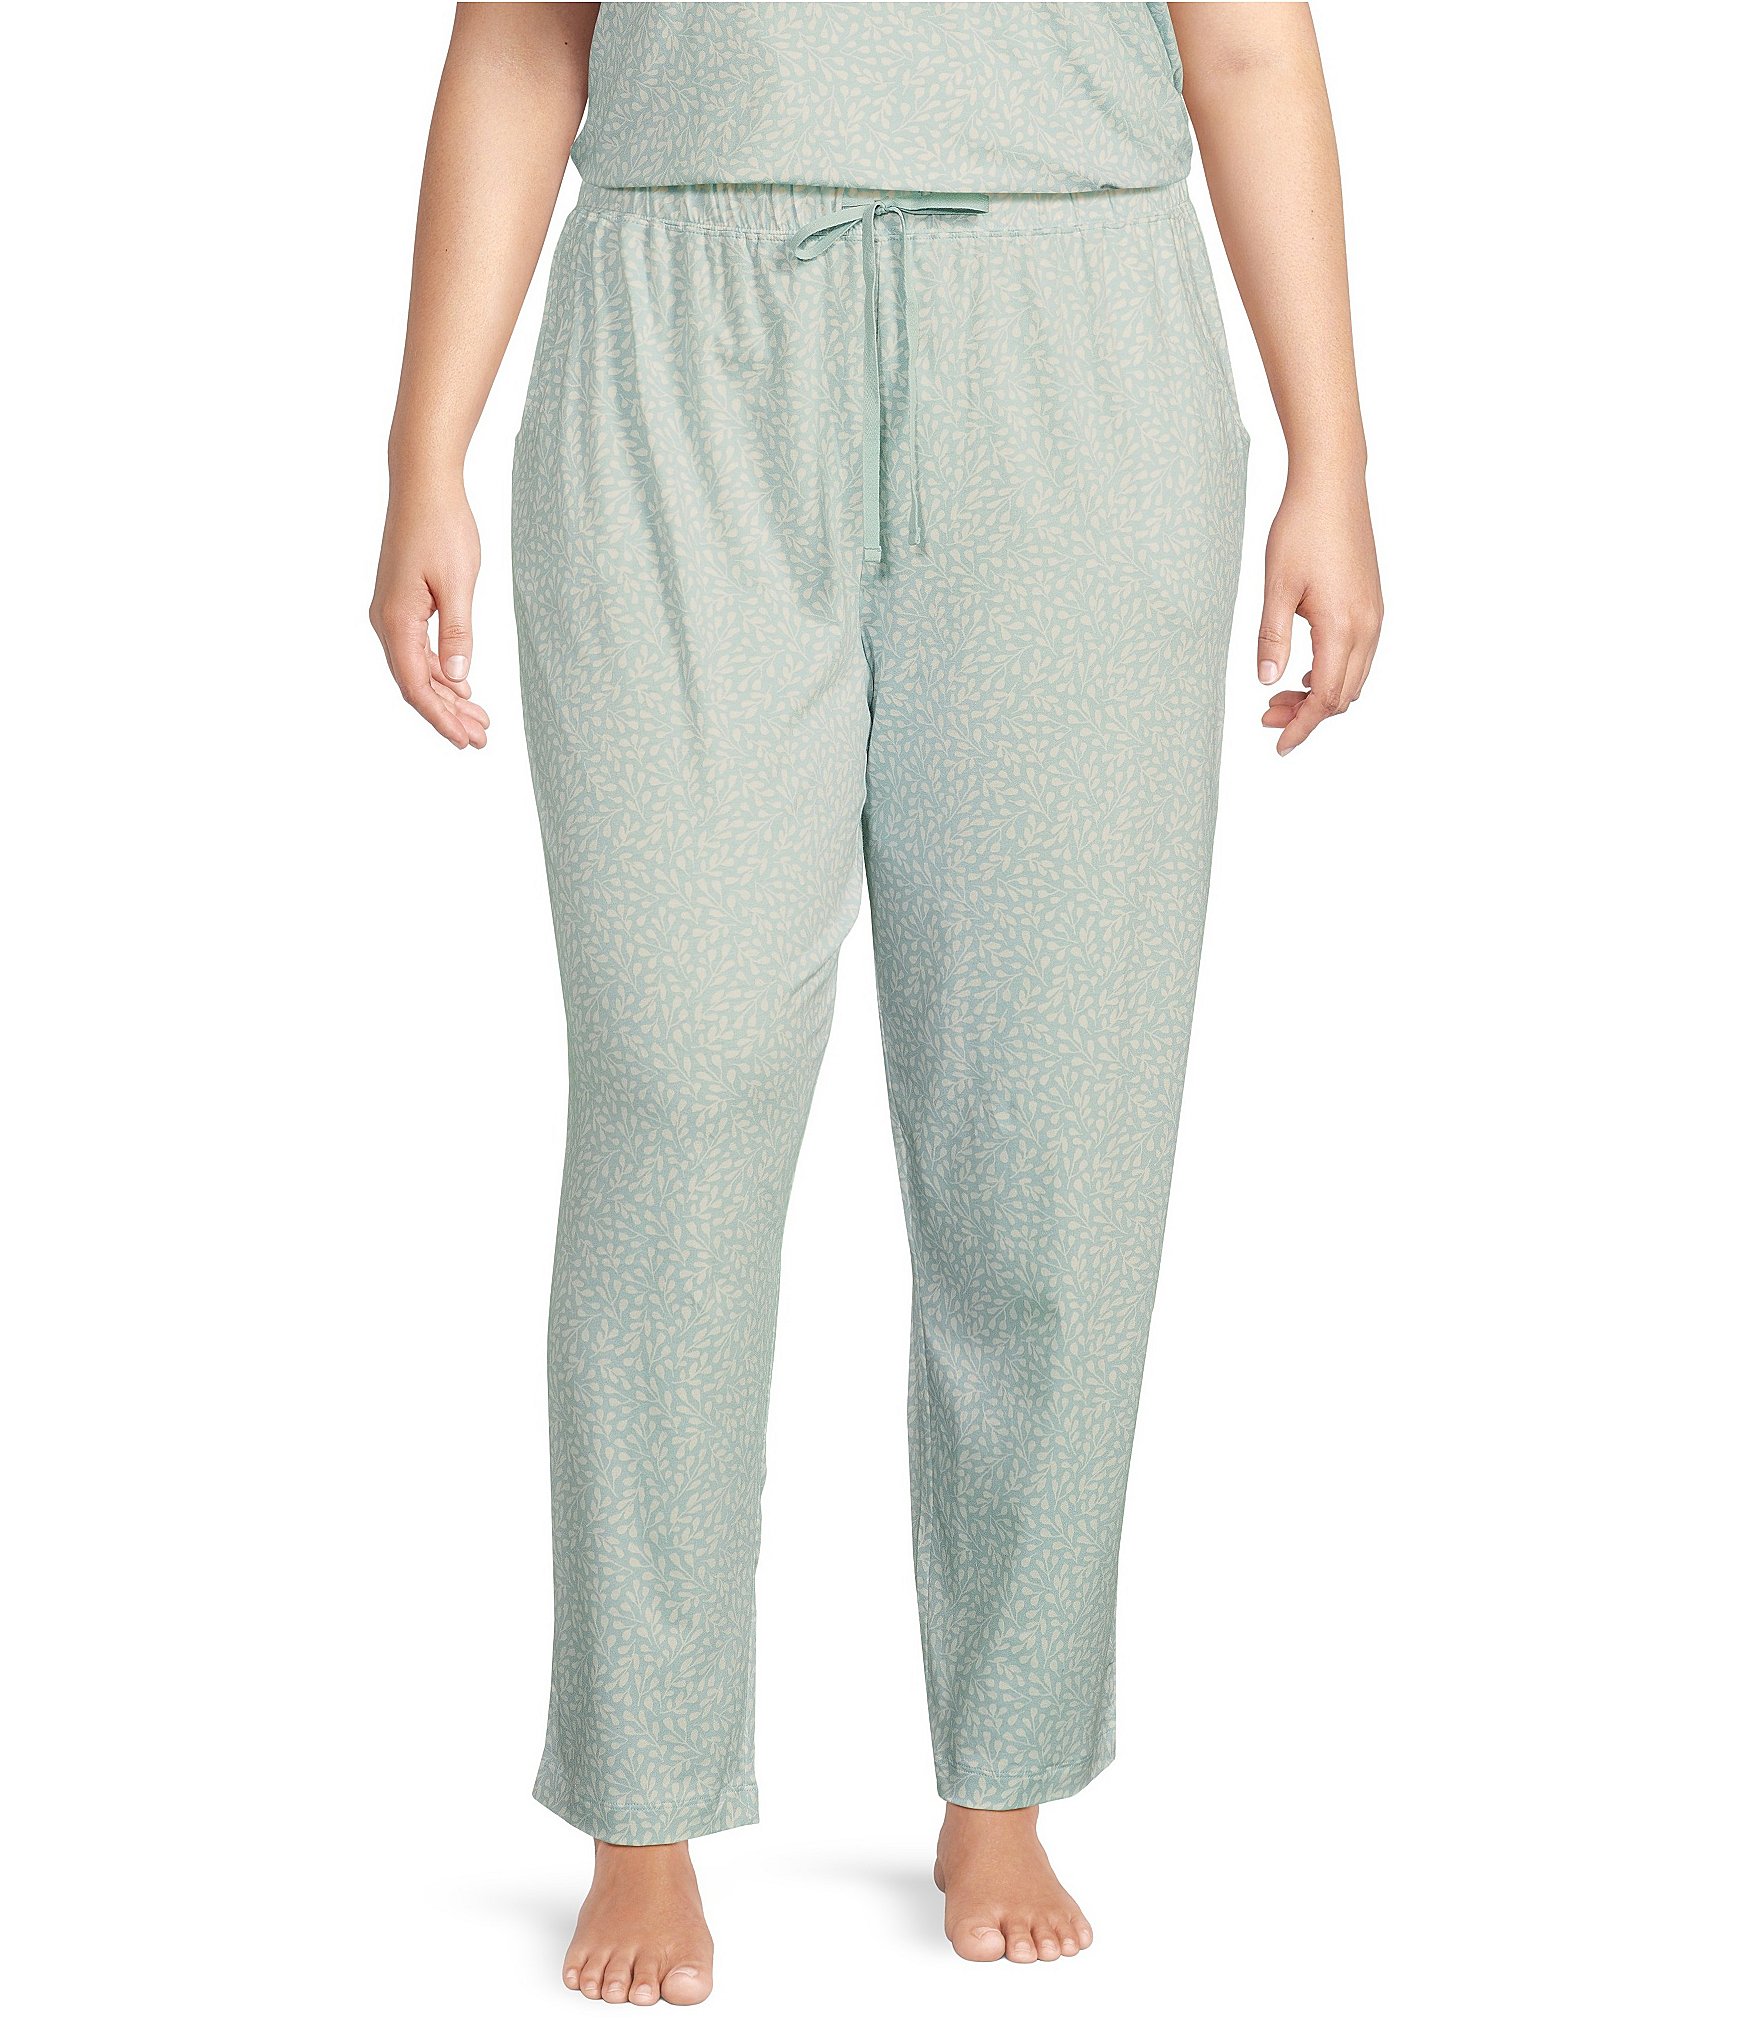 Women's Capri Jersey Knit Pajama Lounge Pant Available In Plus Size